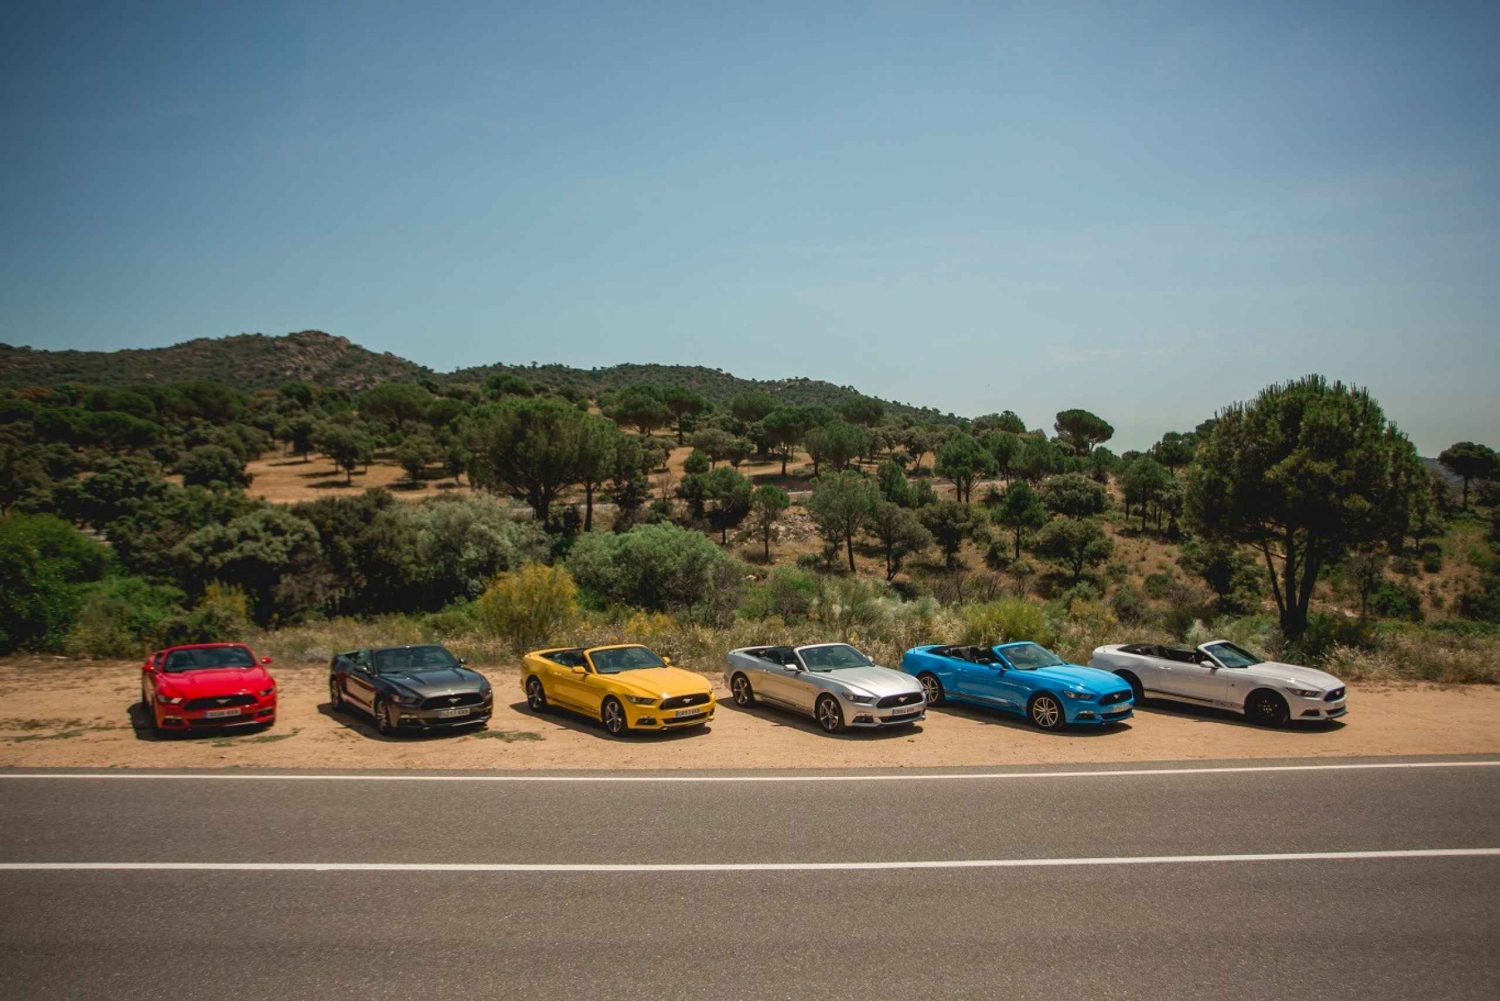 Madrid: Toledo Guided Tour and Mustang Driving Experience